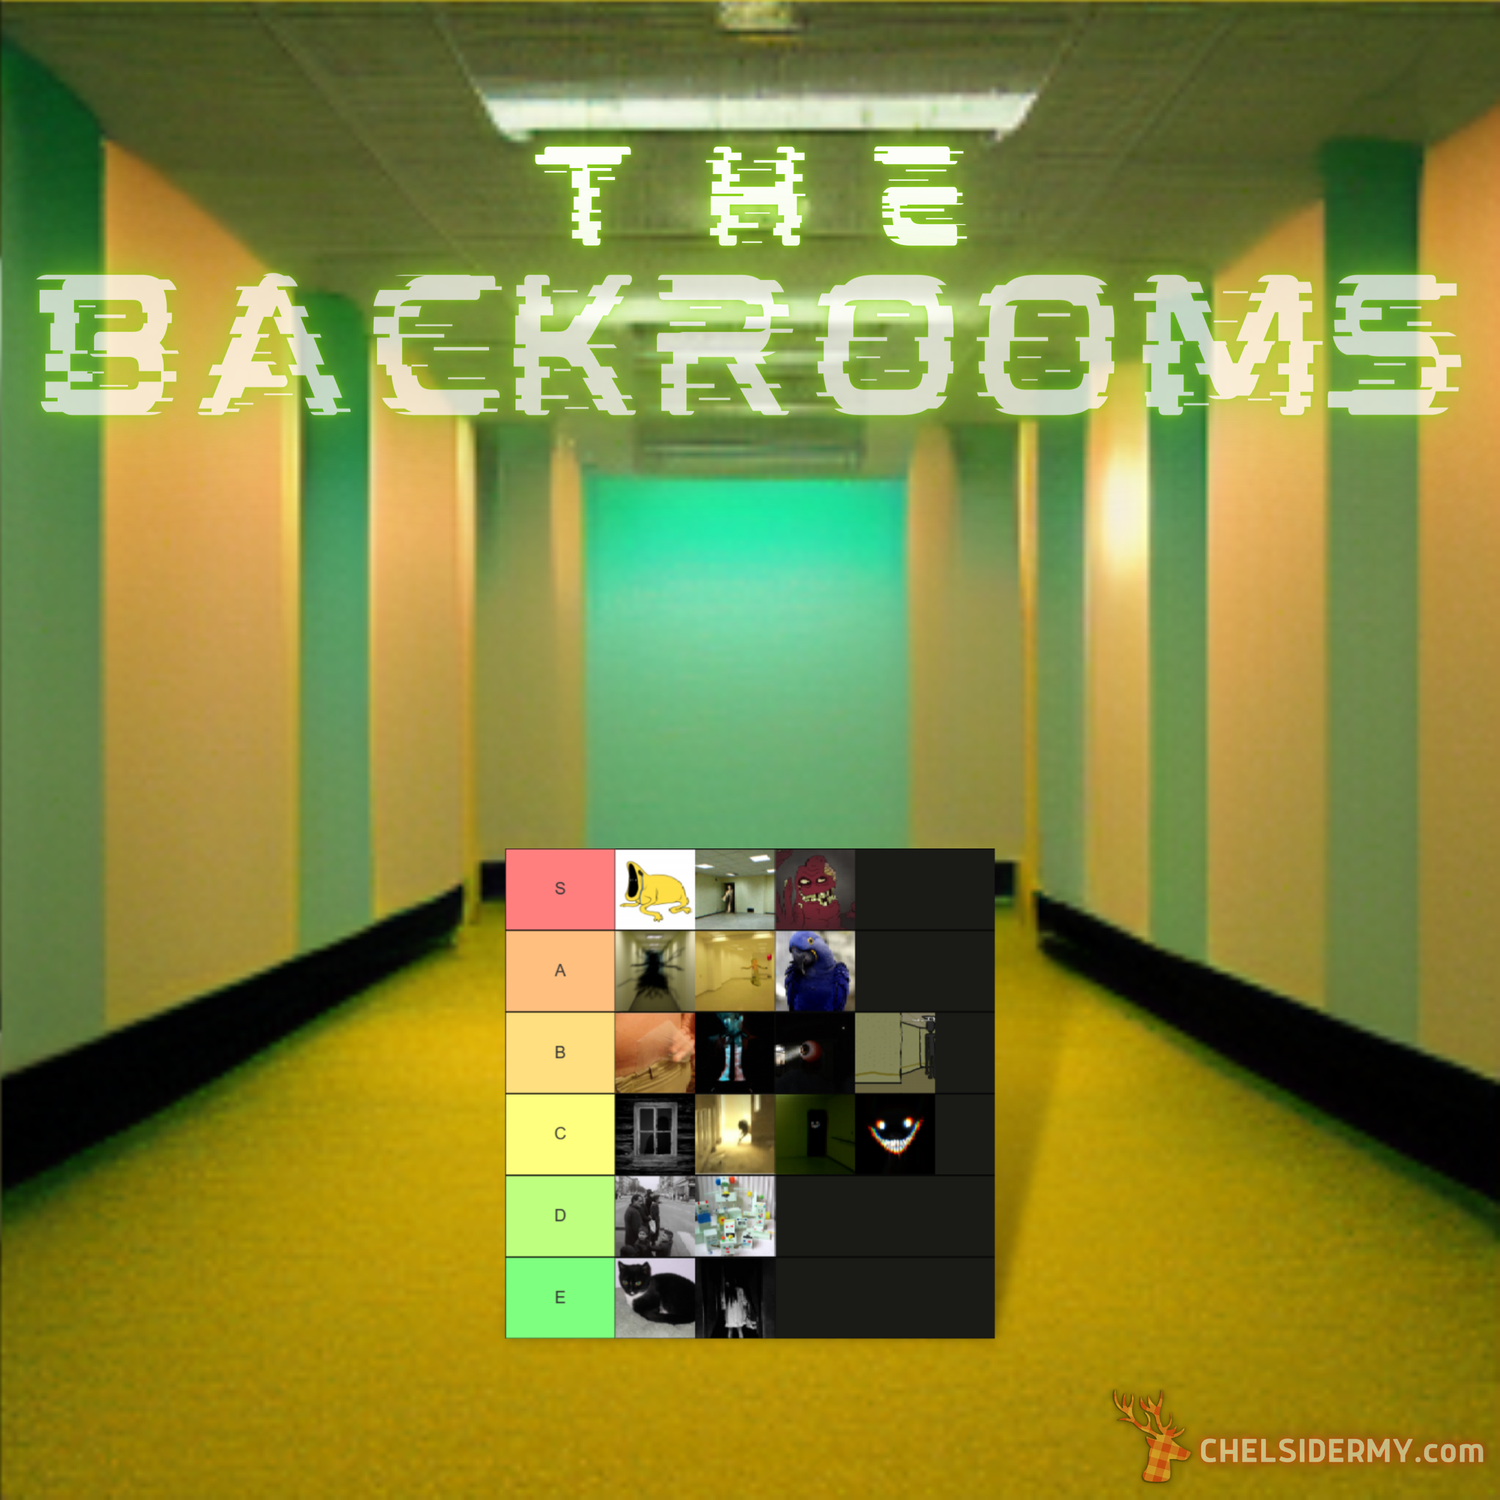 The GreenRooms, The Ultimate Backrooms Wiki